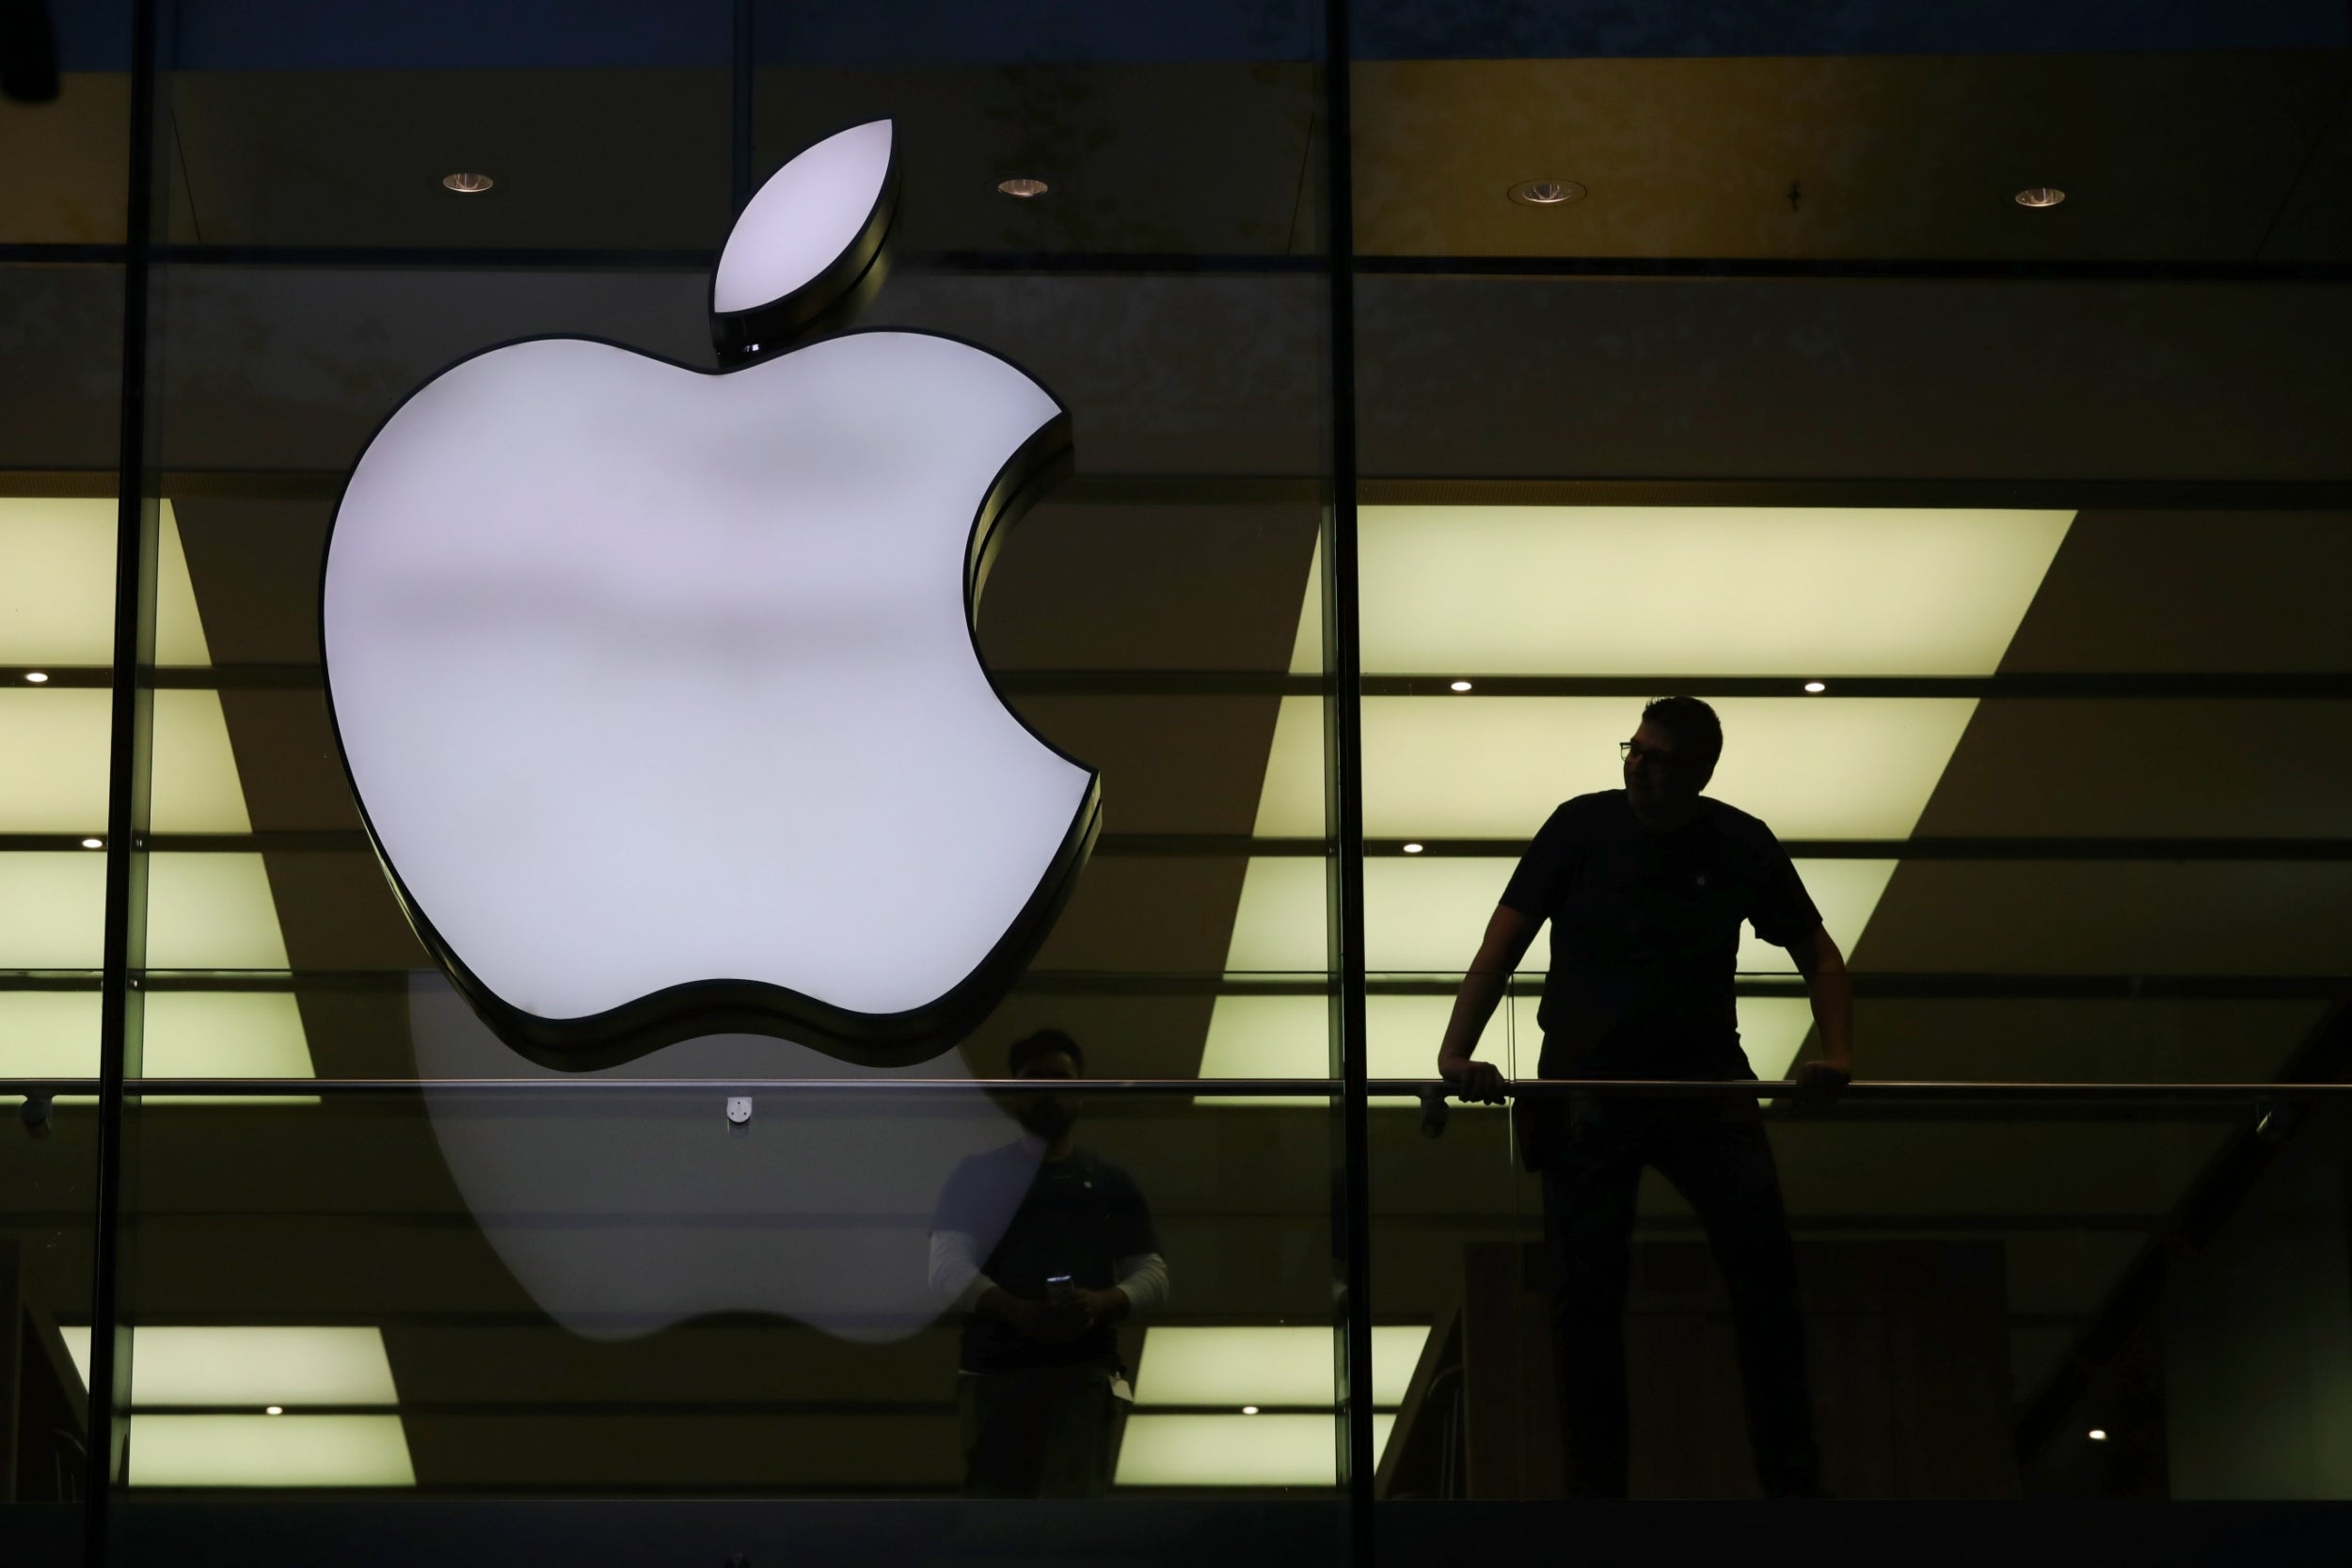 Bigger than the FTSE: Apple shares have surged since March